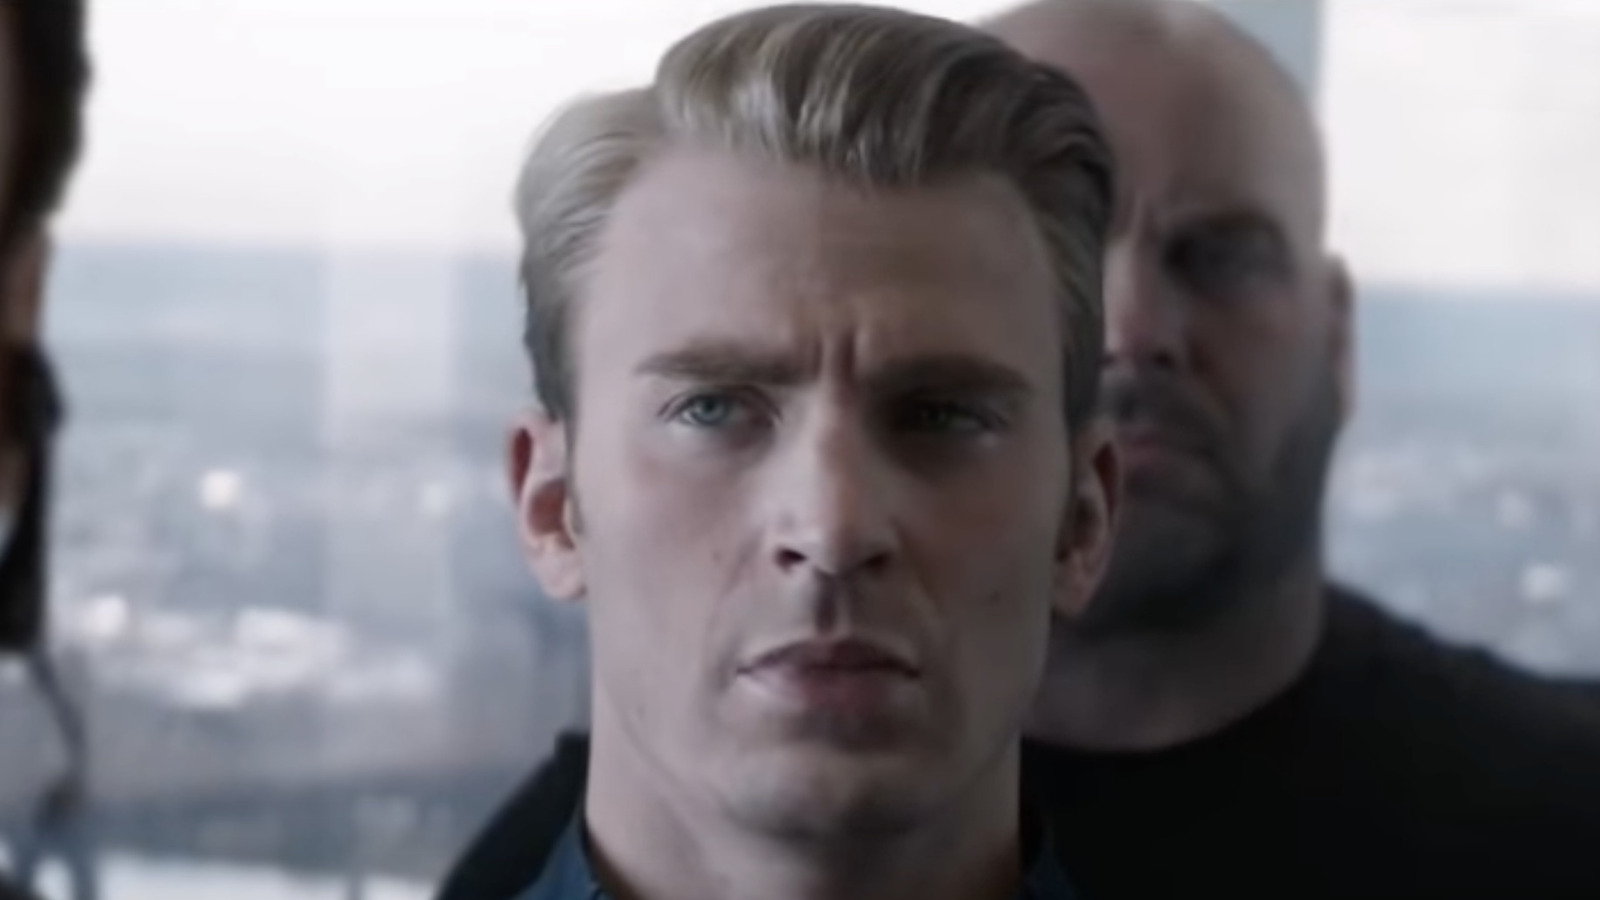 The Captain America Scene In Avengers Endgame That Has Mcu Fans Scratching Their Heads